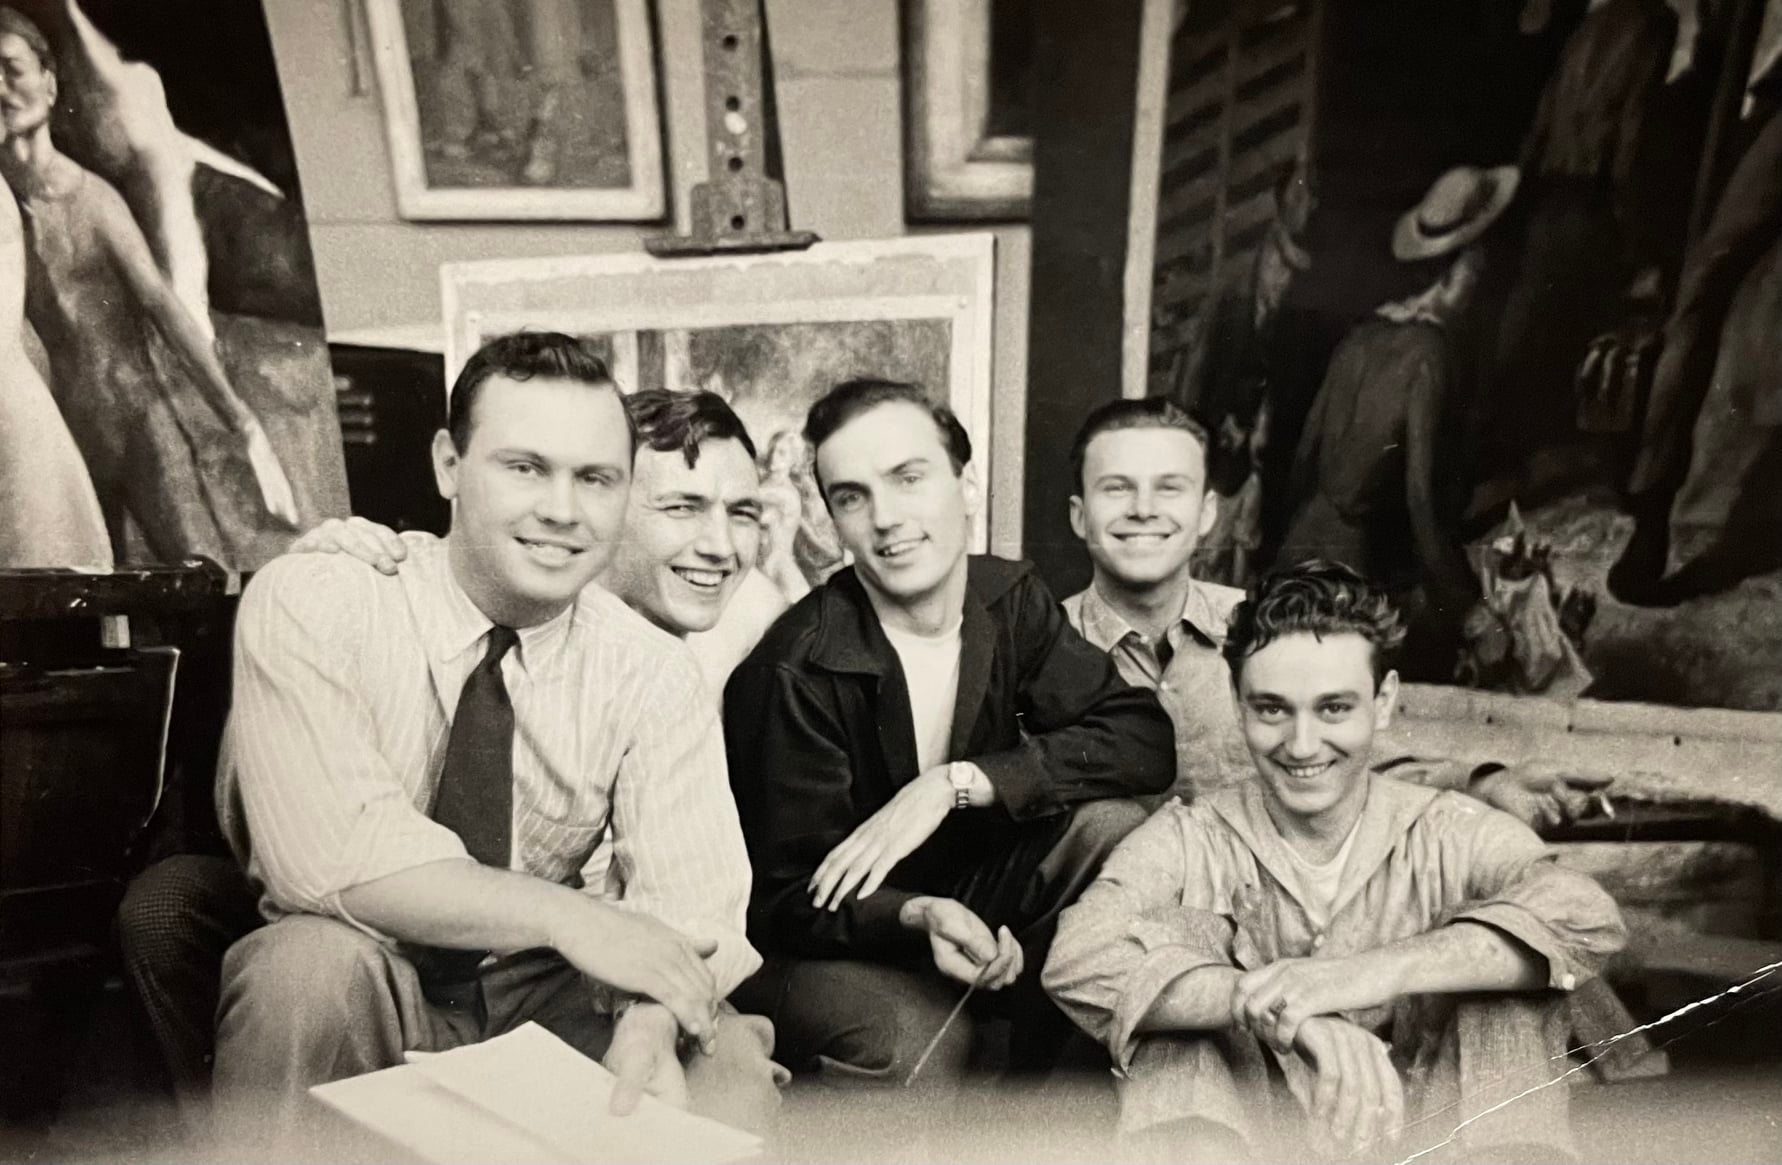  REW as a student at the John Herron Art Institute, probably 1936. Here we see REW with some of his classmates mugging for the camera. From left to right: Jim Gant, REW, Joe Cox, Harry Davis and Loren Fisher. REW, Harry Davis, and Joe Cox would remai